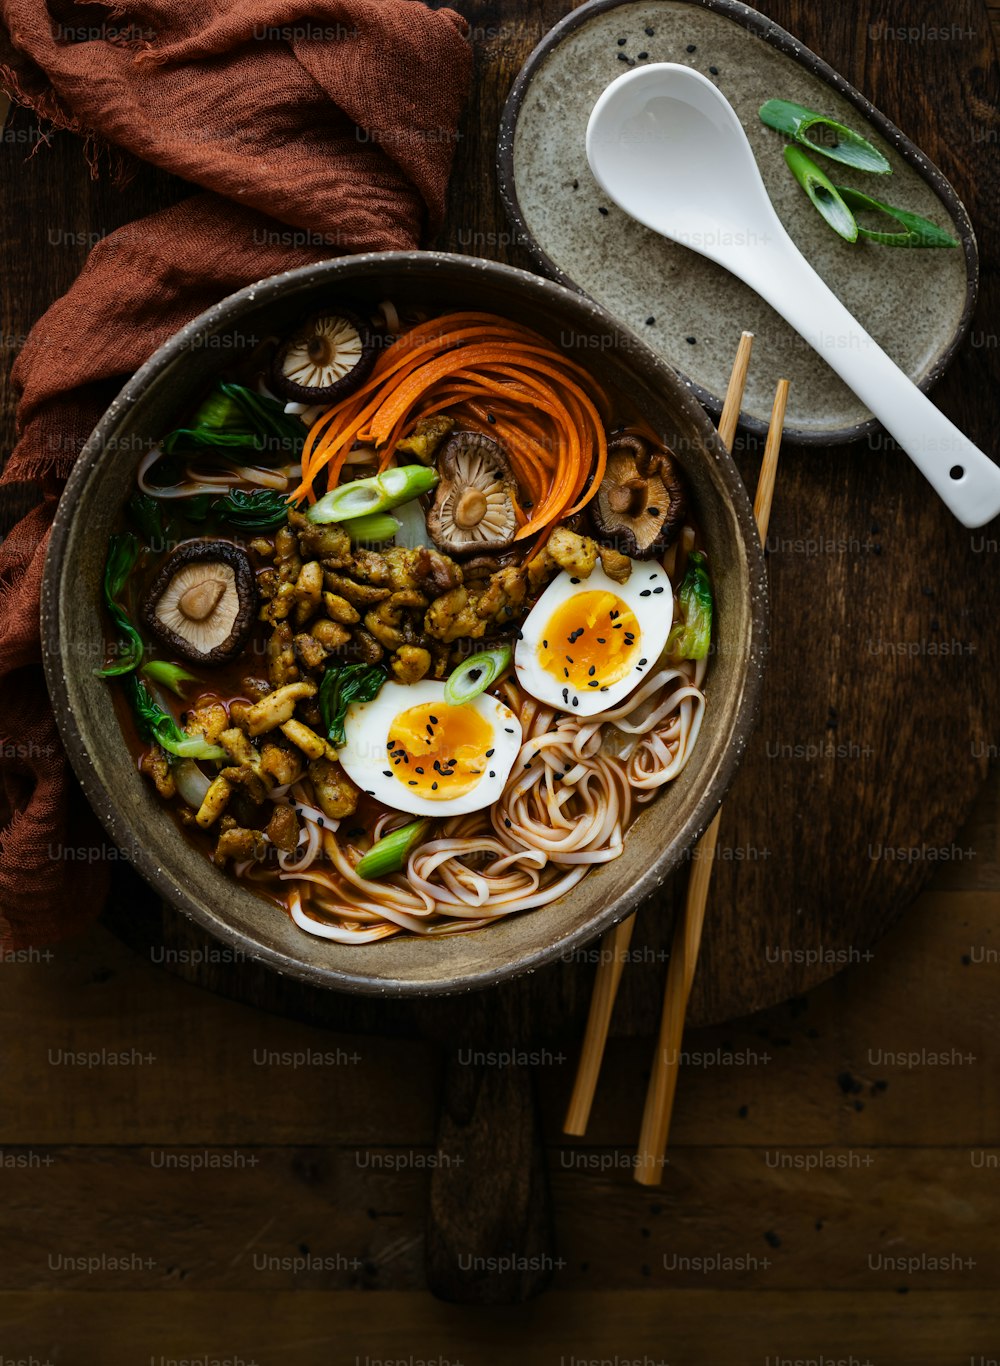 a bowl of noodles, carrots, mushrooms, and hard boiled eggs